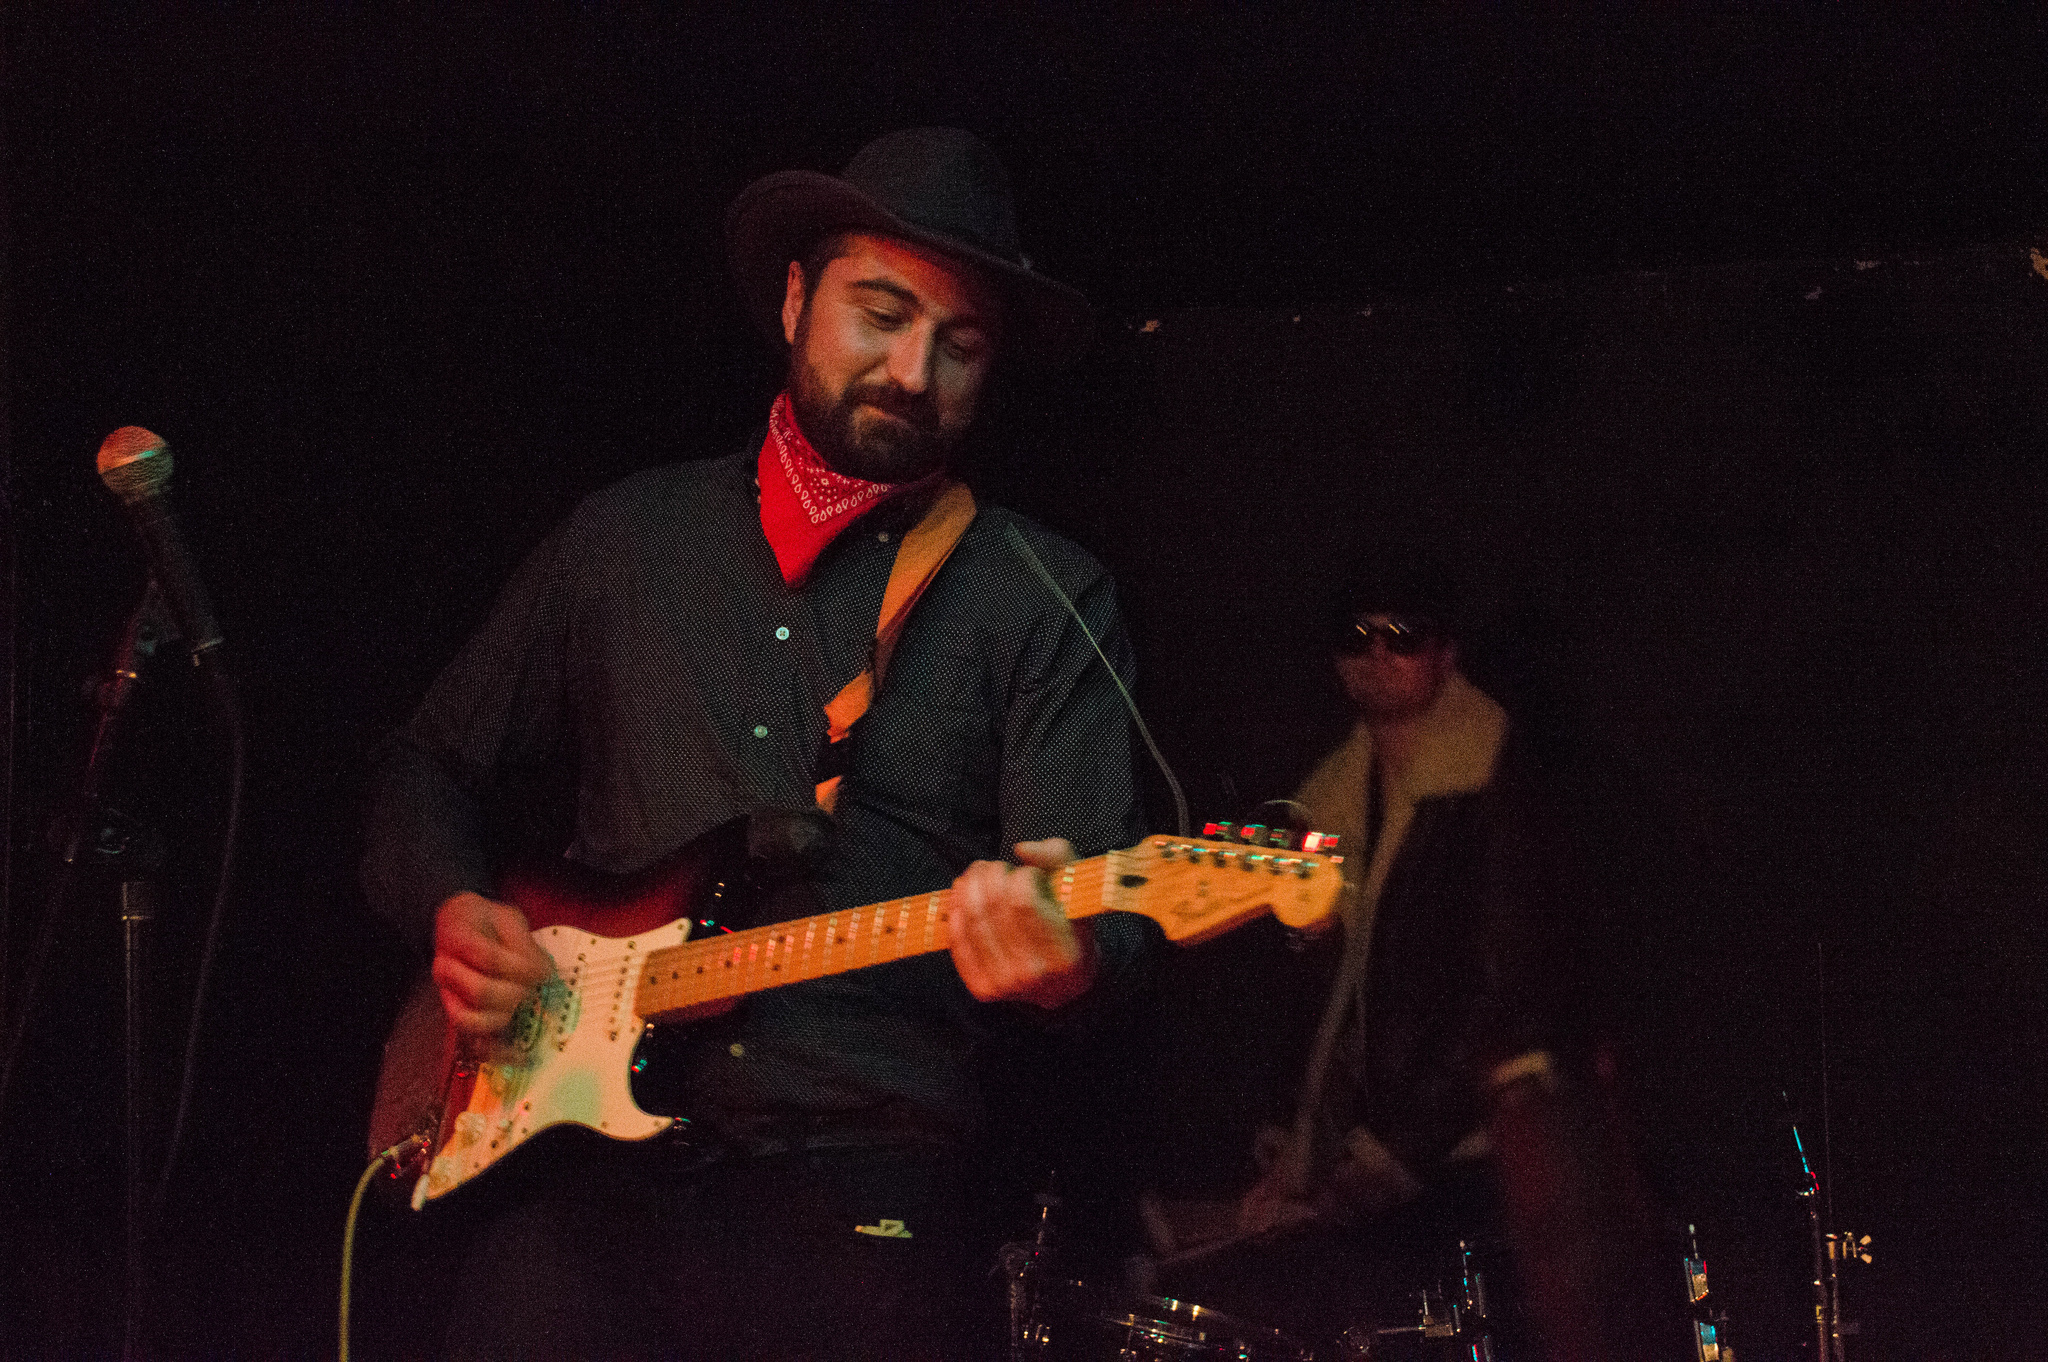 Lonesome Nick at No Smoking Media Munchies Showcase 2/12 at Muchmore's in Brooklyn